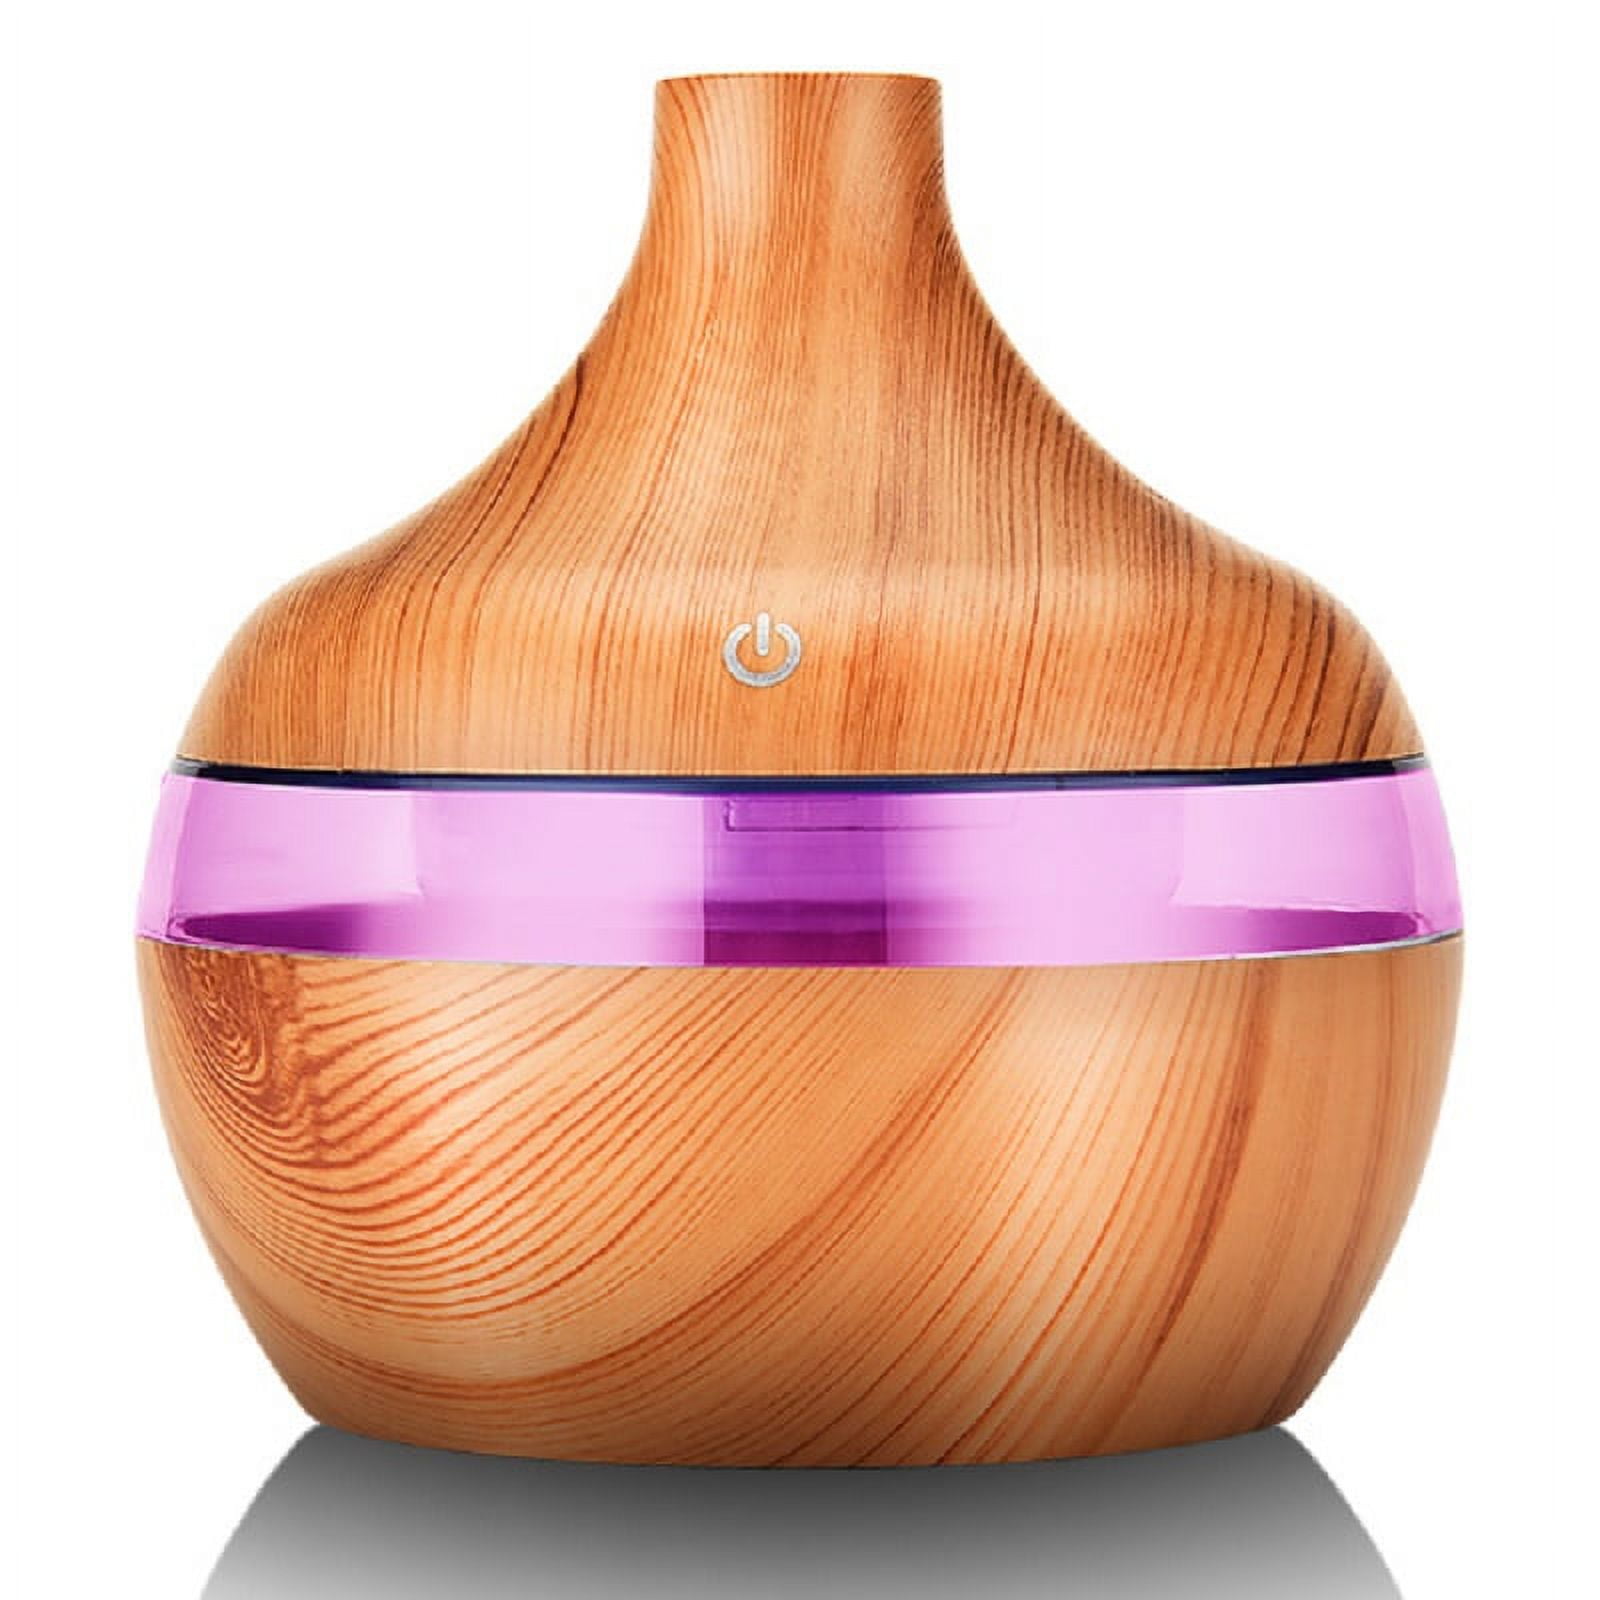 Essential Oil Diffuser with Flame Light, Ultrasonic Super Quiet Diffuser  for Aromatherapy Essential Oils Mist Humidifiers with 7 Flame Color,  Auto-Off Protection Oil Diffusers for home Office 